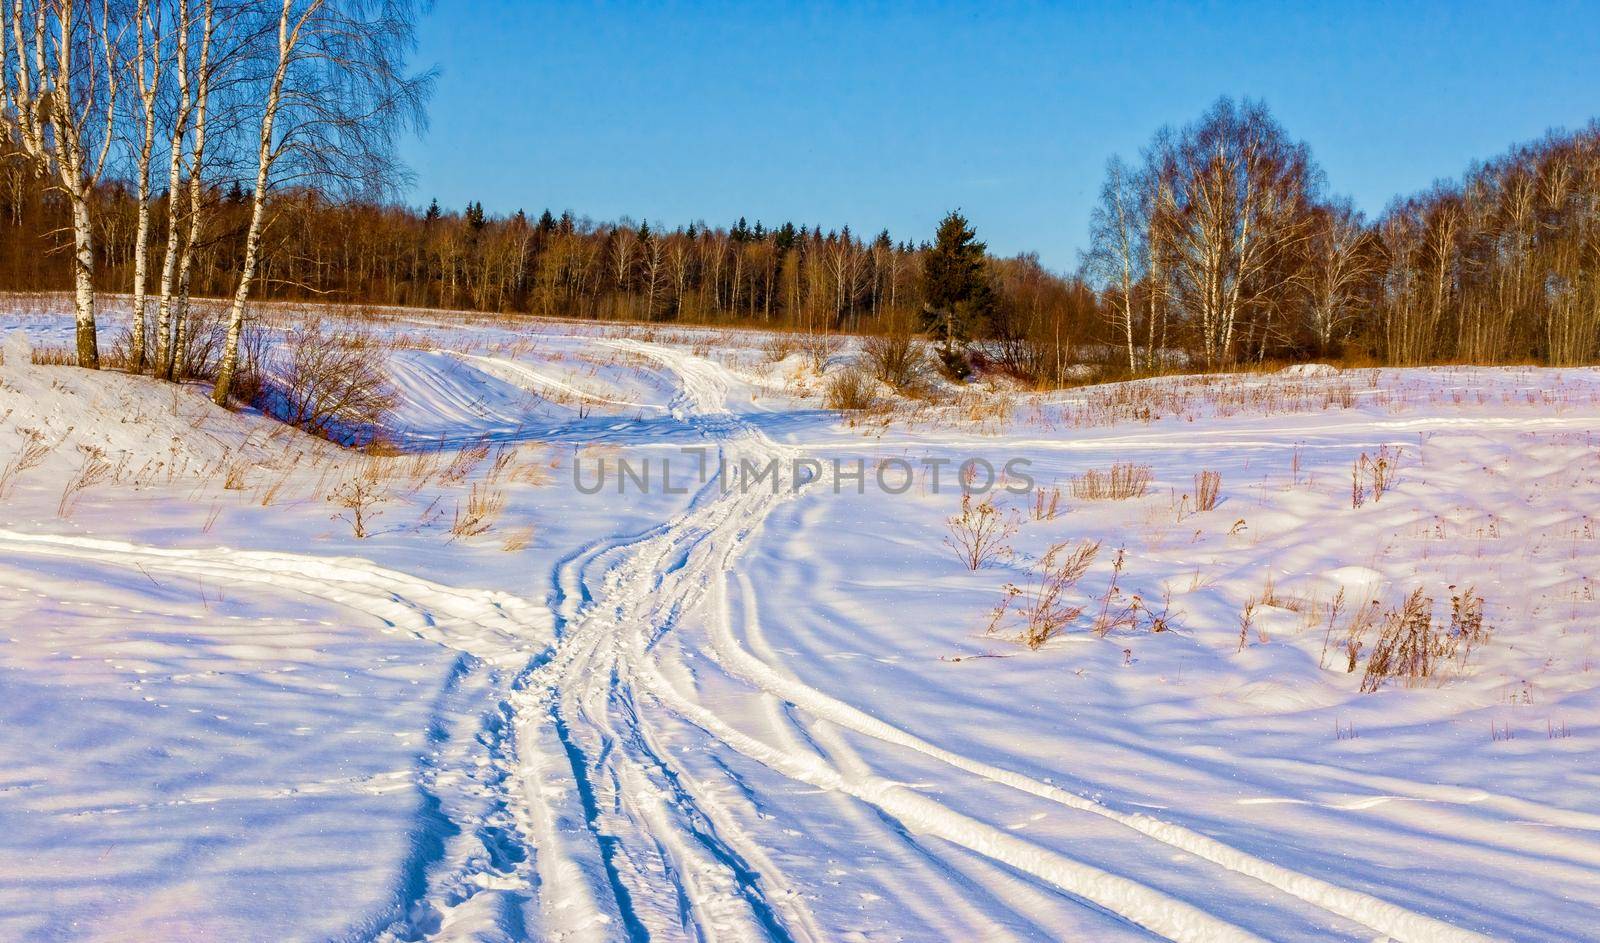 Beautiful winter landscape in Russia, Moscow region. The concept of Christmas, winter outdoor recreation.